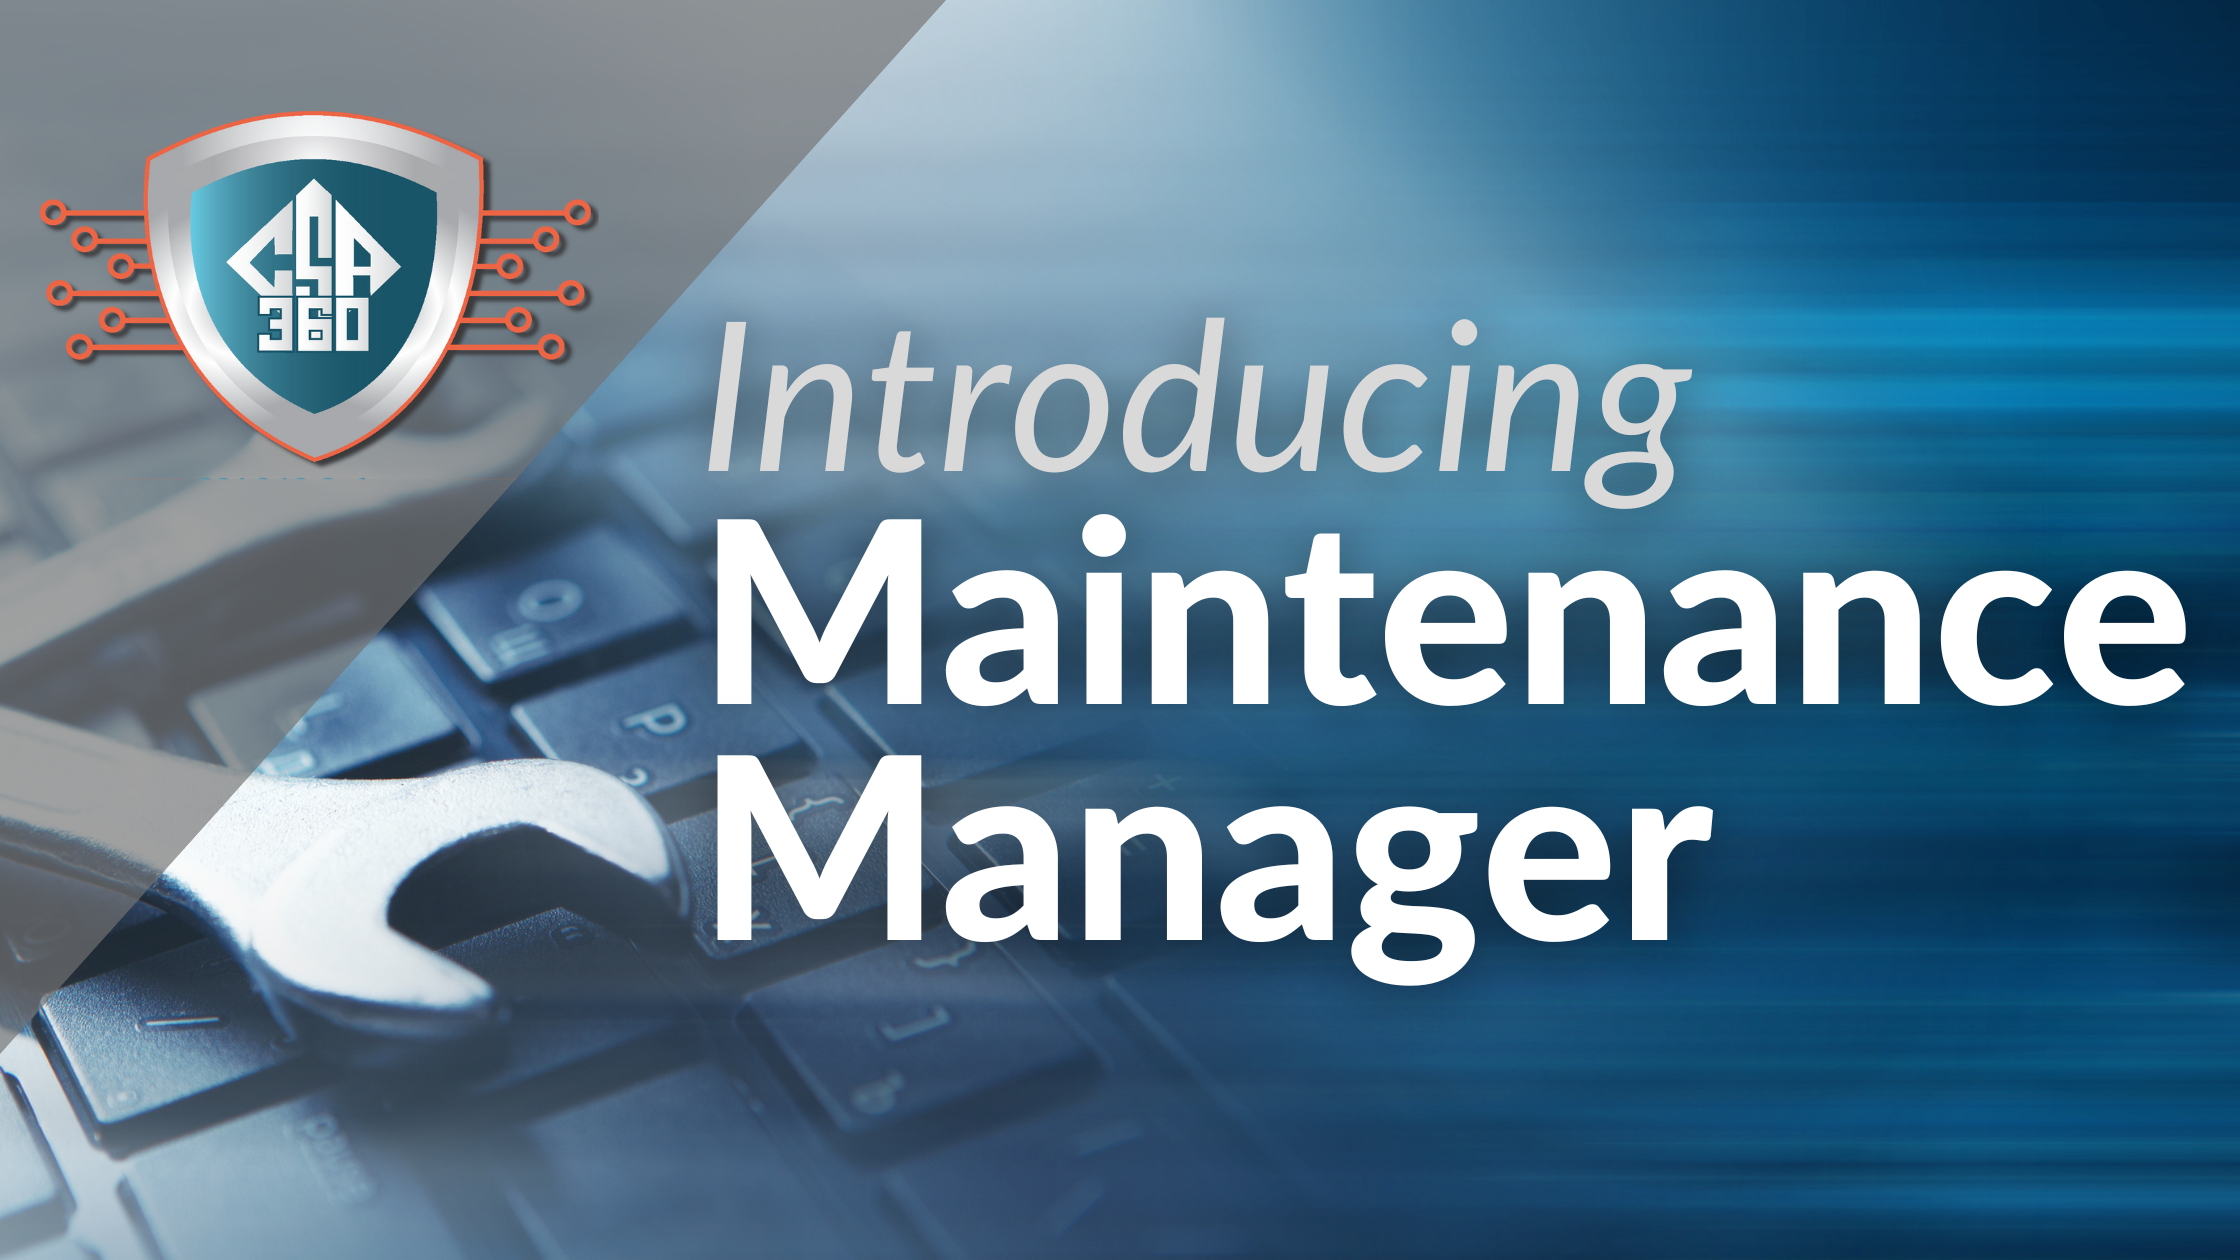 Introducing Maintenance Manager